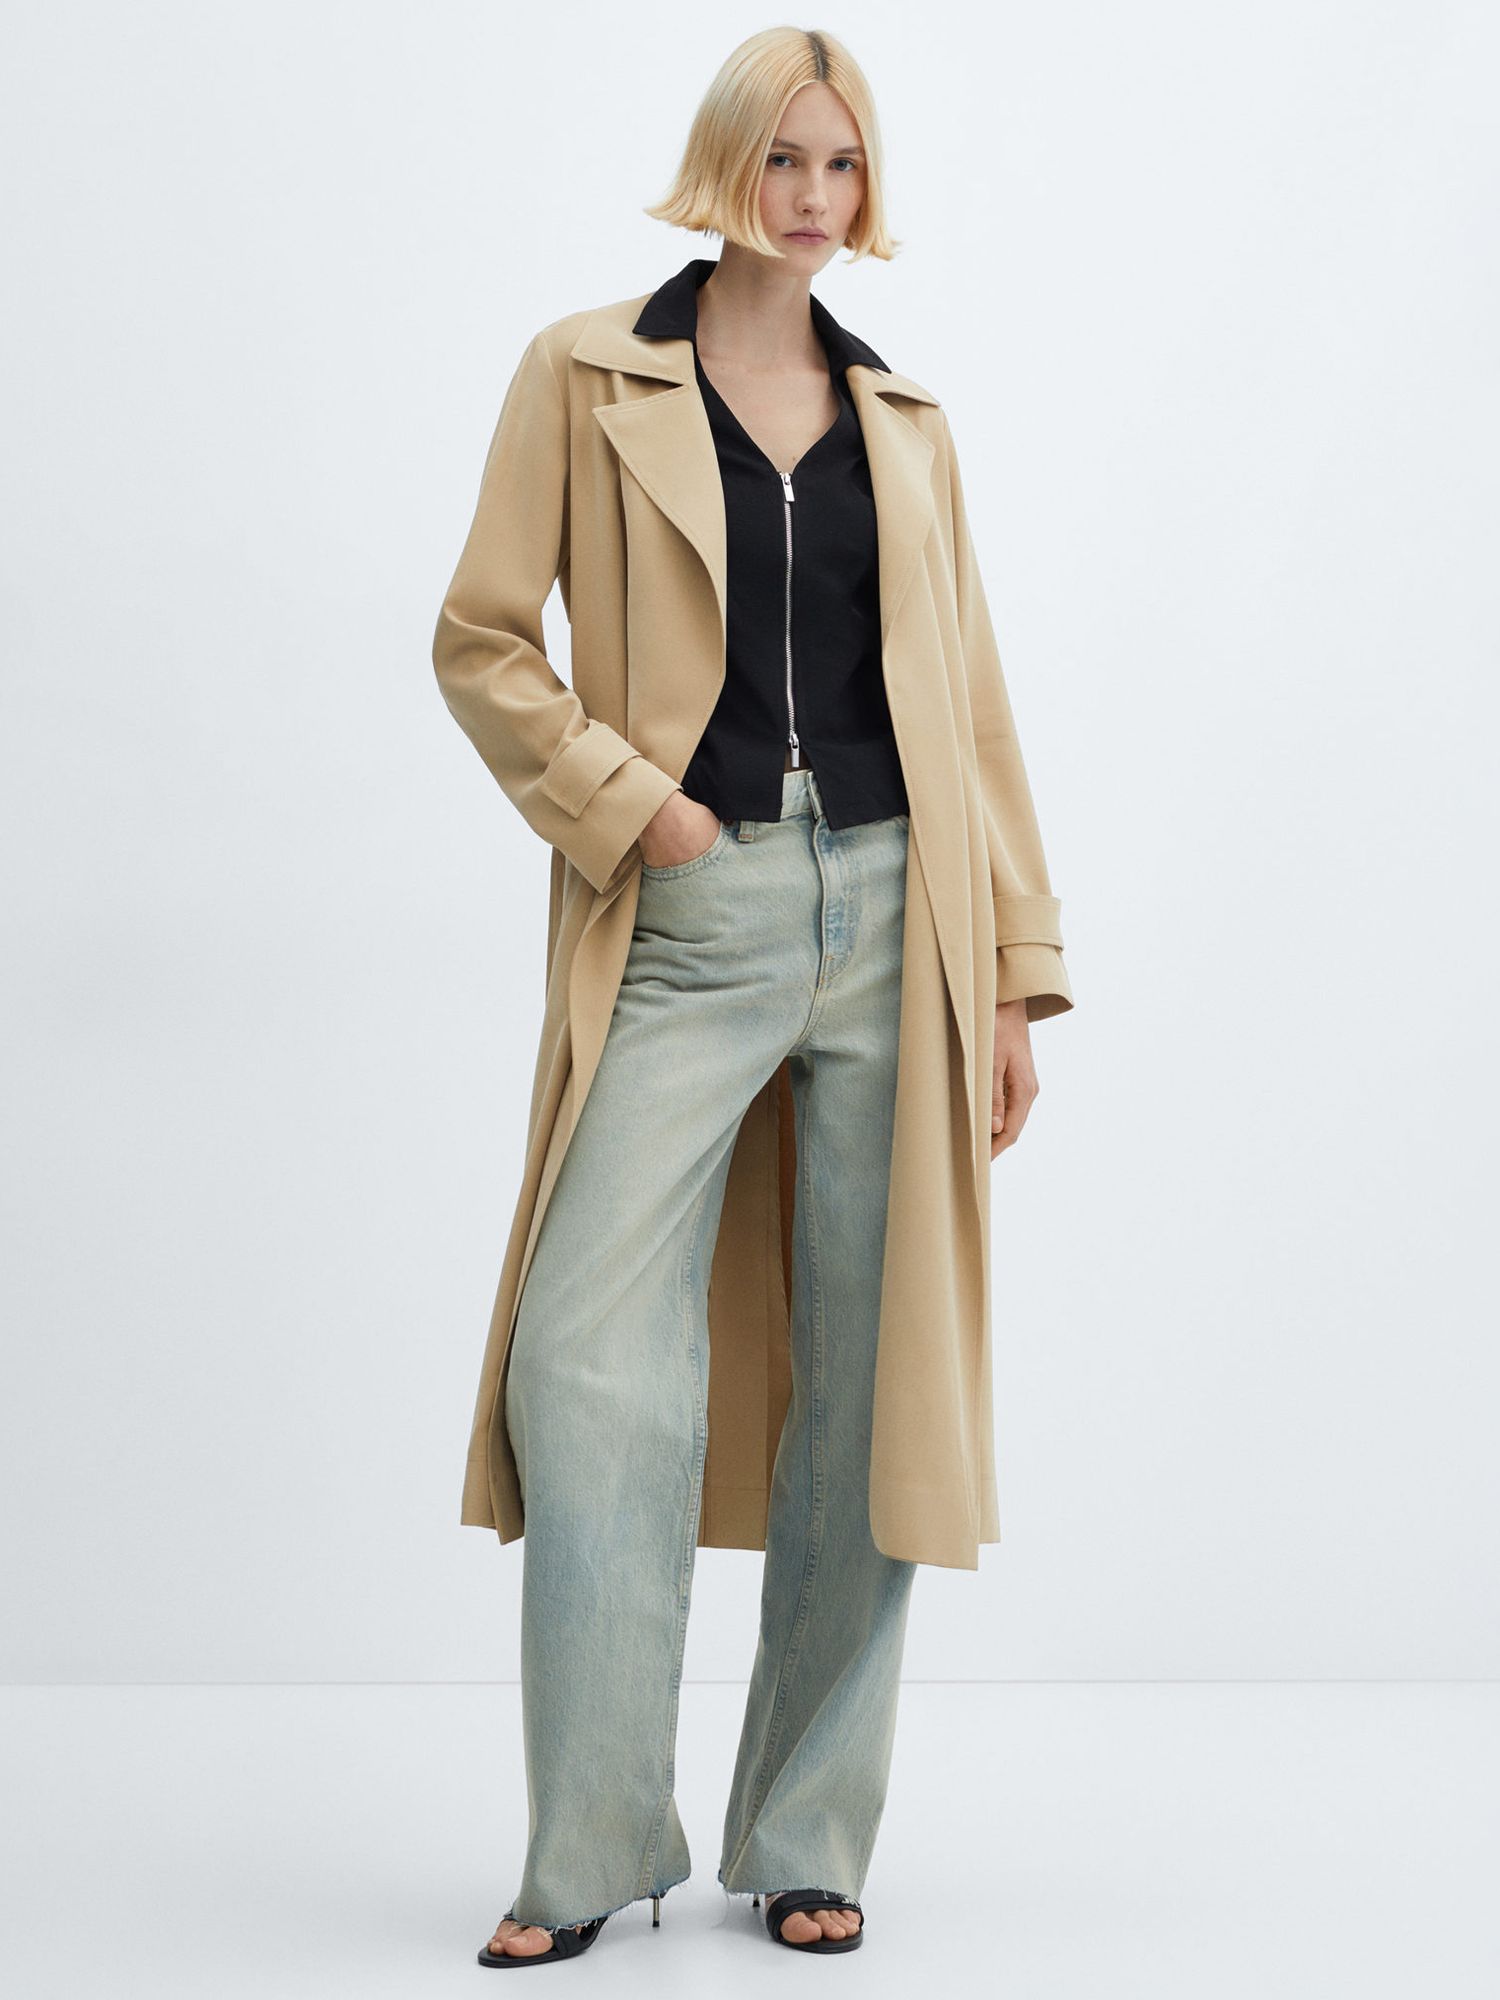 Buy Mango Taxi Flowy Lapel Trench Online at johnlewis.com